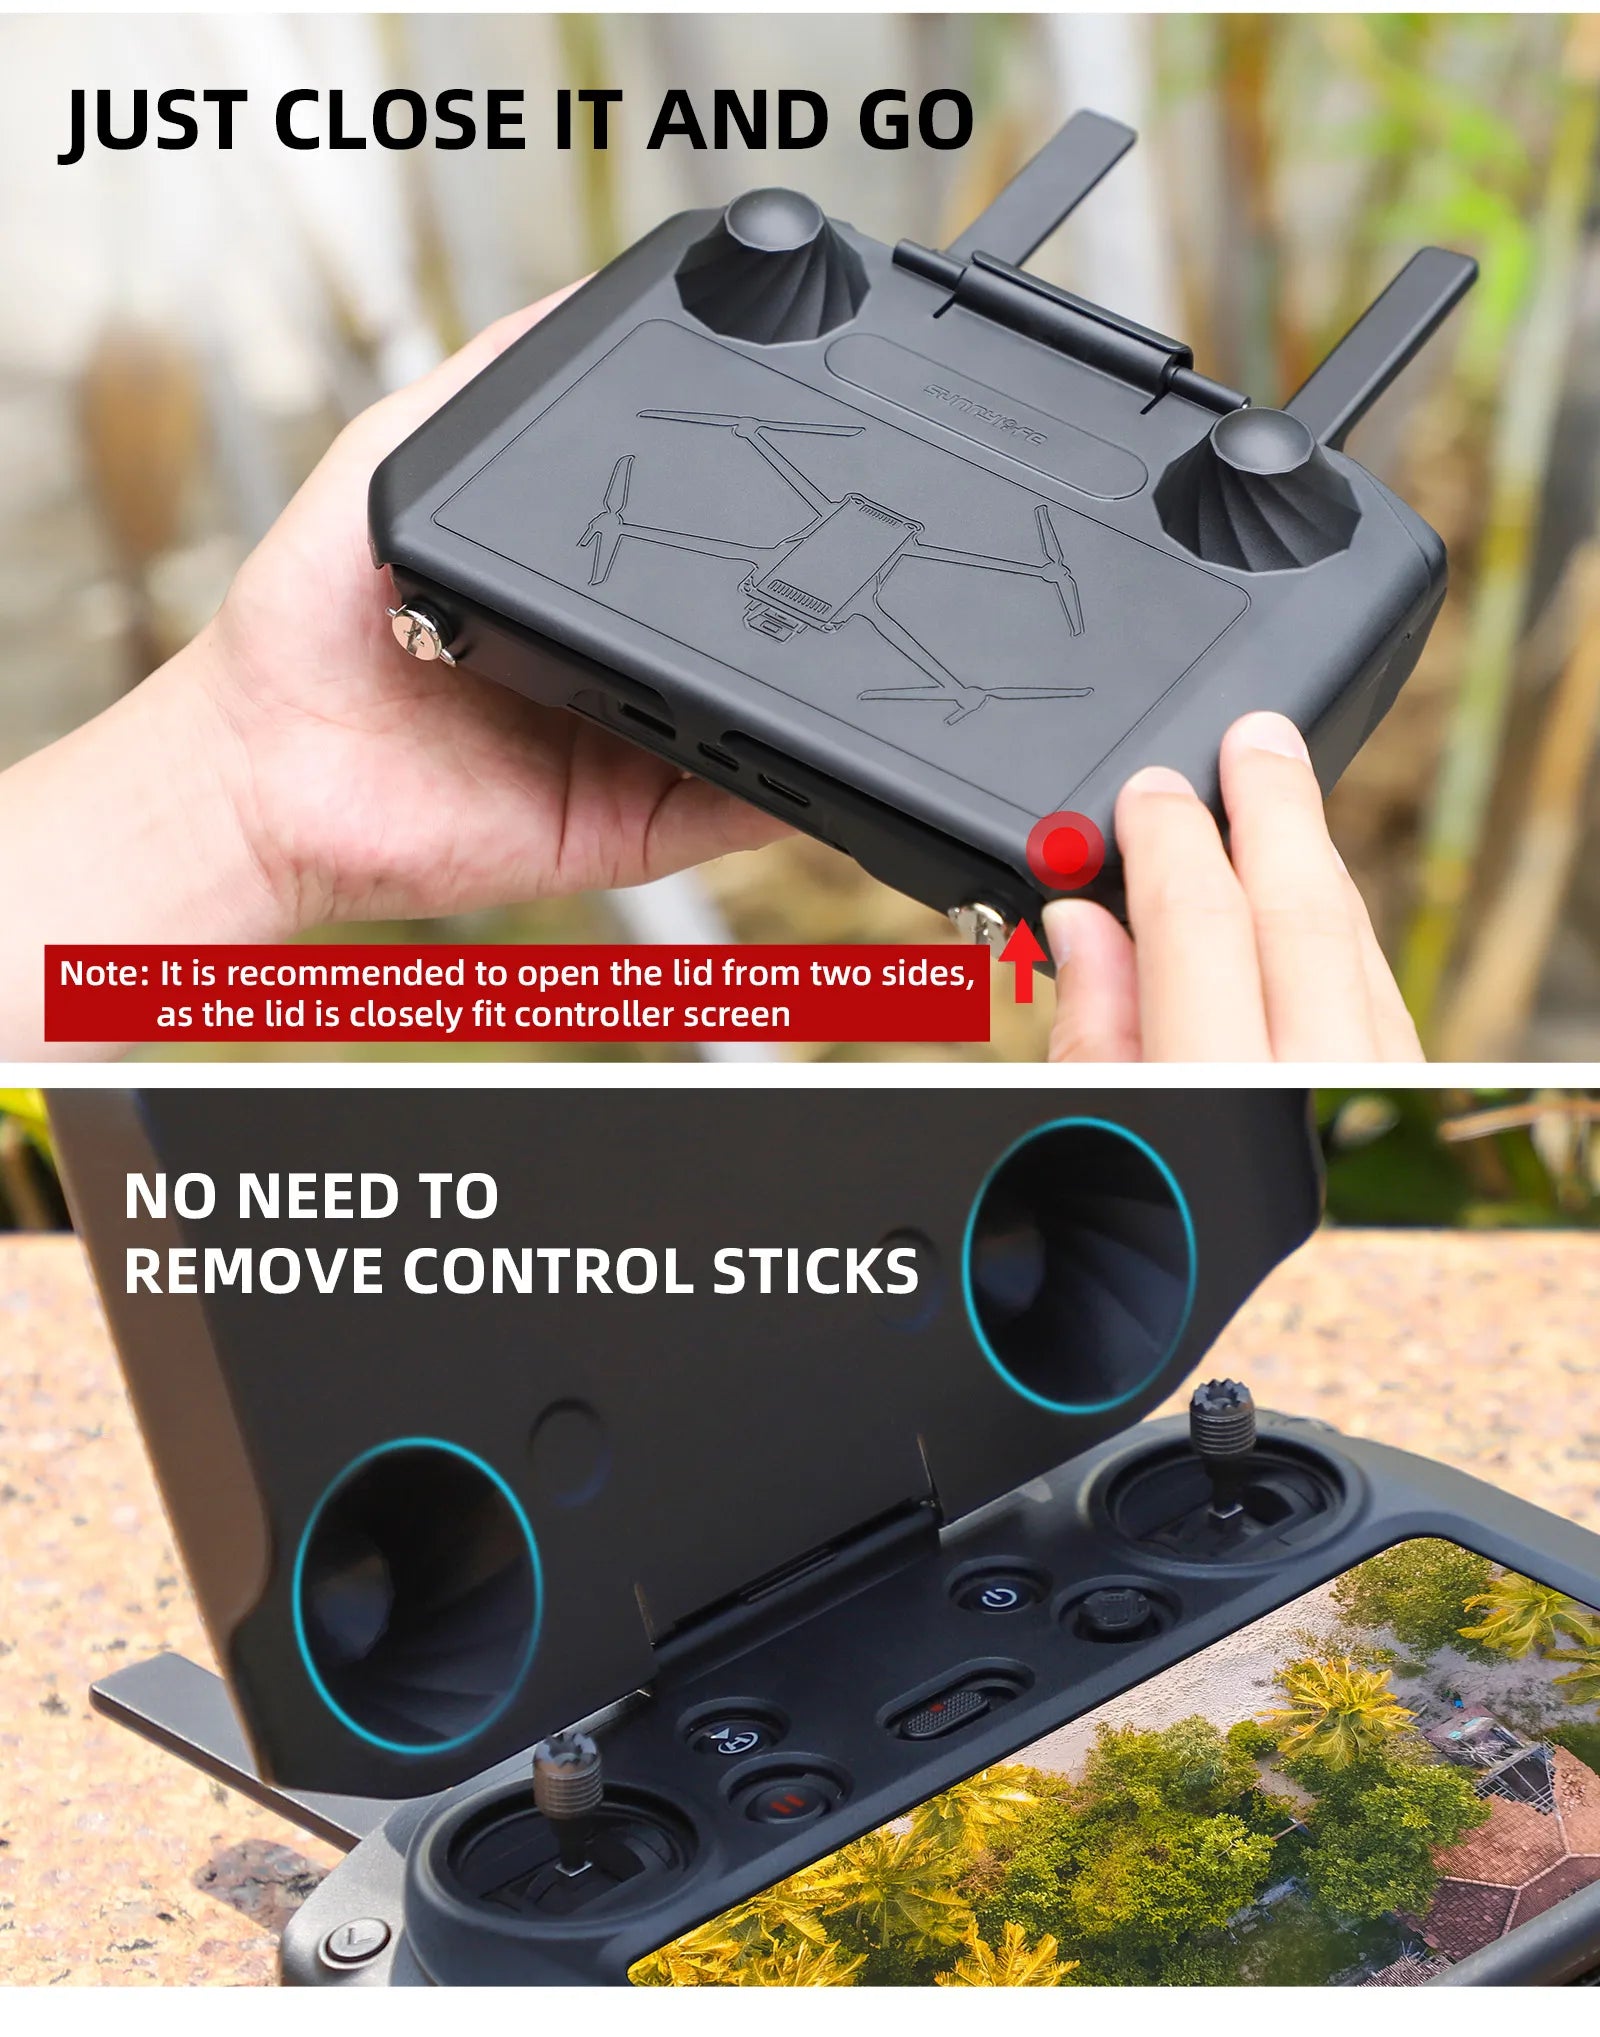 it is recommended to open the lid from two sides, as the lid is closely fit controller screen